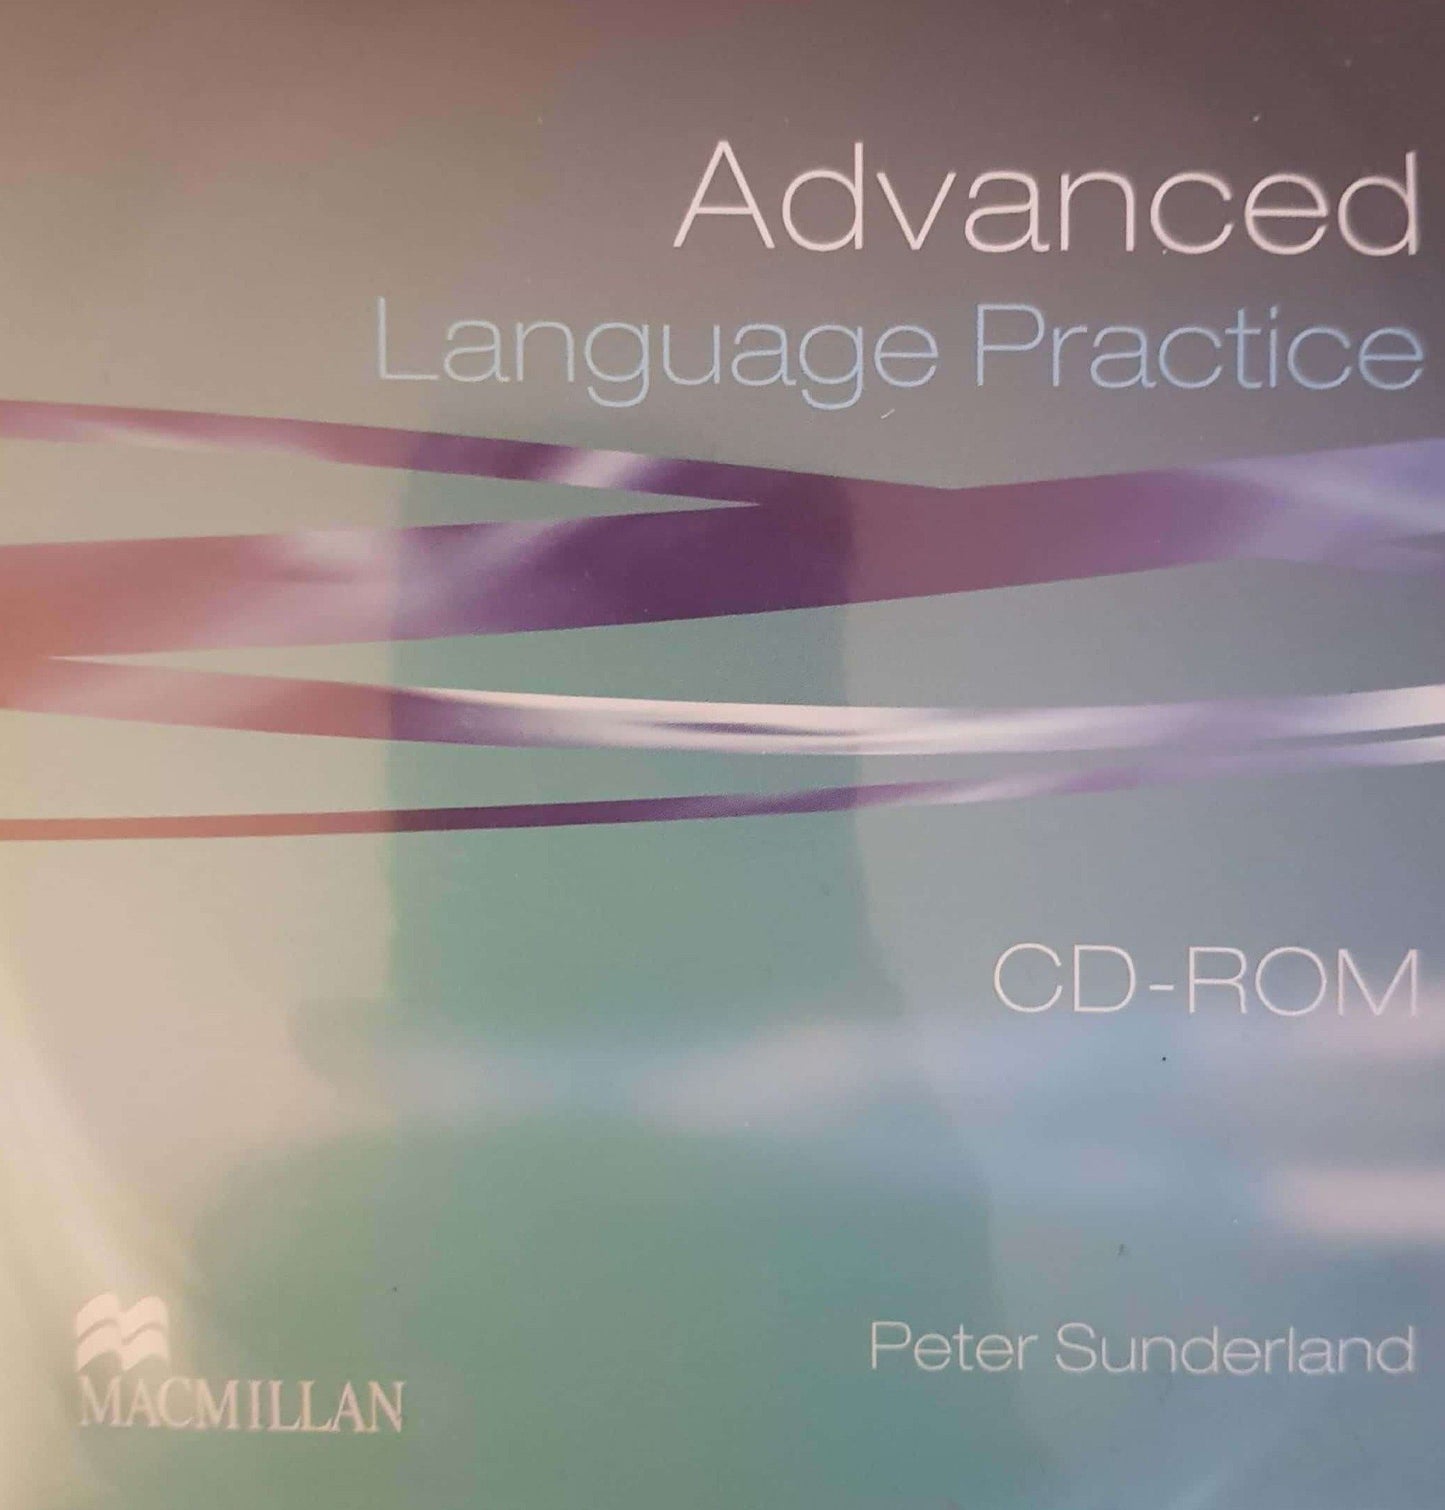 Advanced Language Practice Like New Not Appicable  (4619395891255)